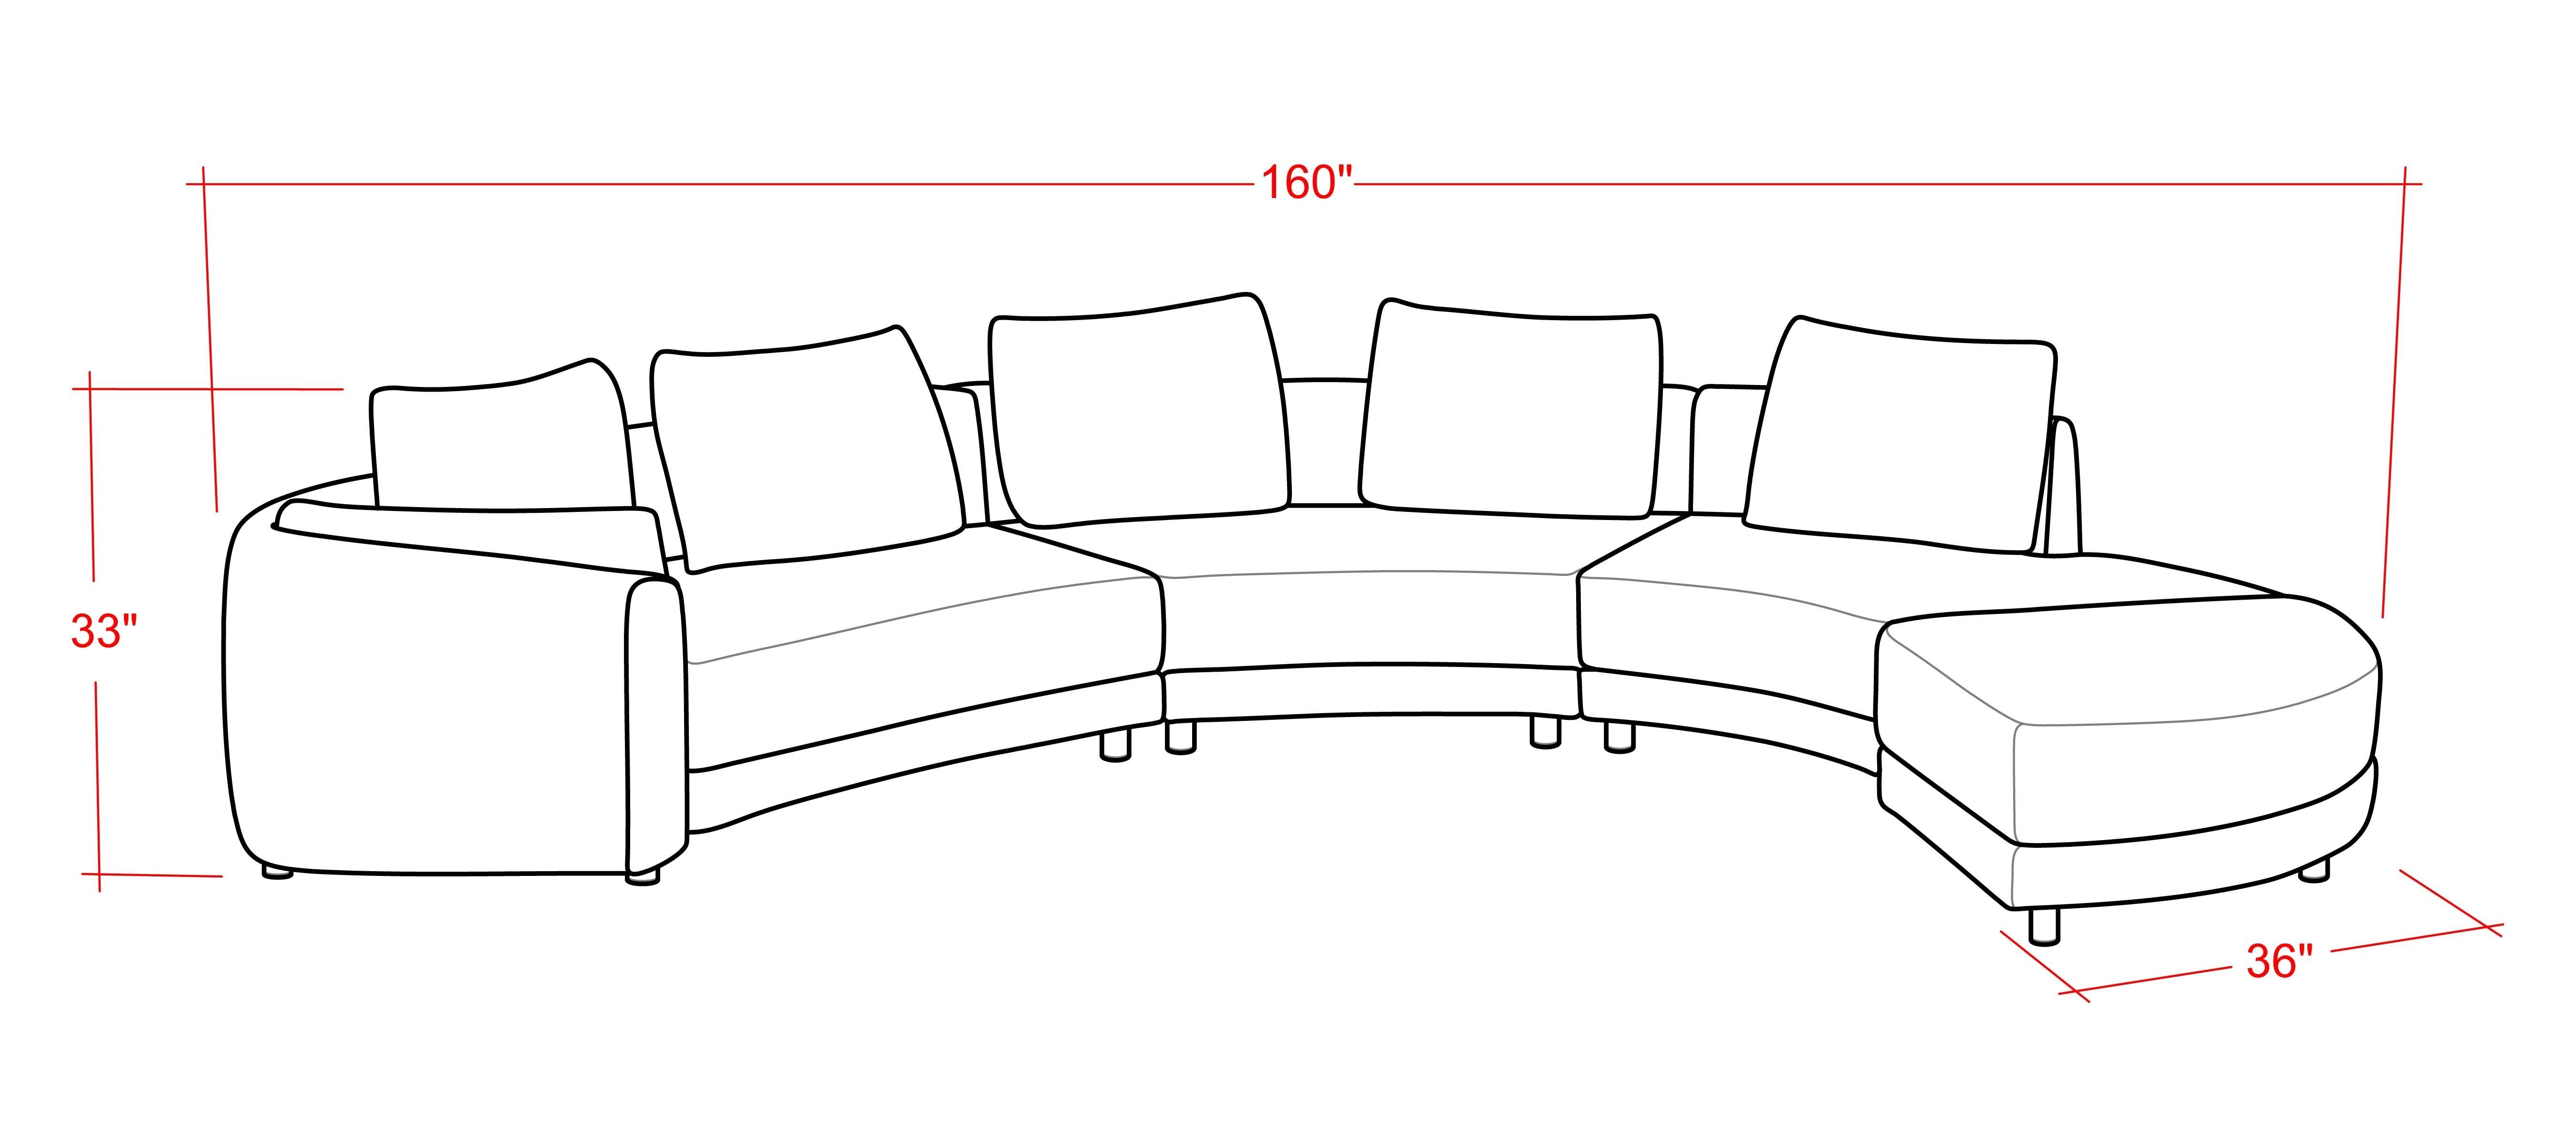 Curved Sectional Sofa Dimensions Hereo Sofa With Regard To Conversation Sofa Sectional (View 9 of 15)